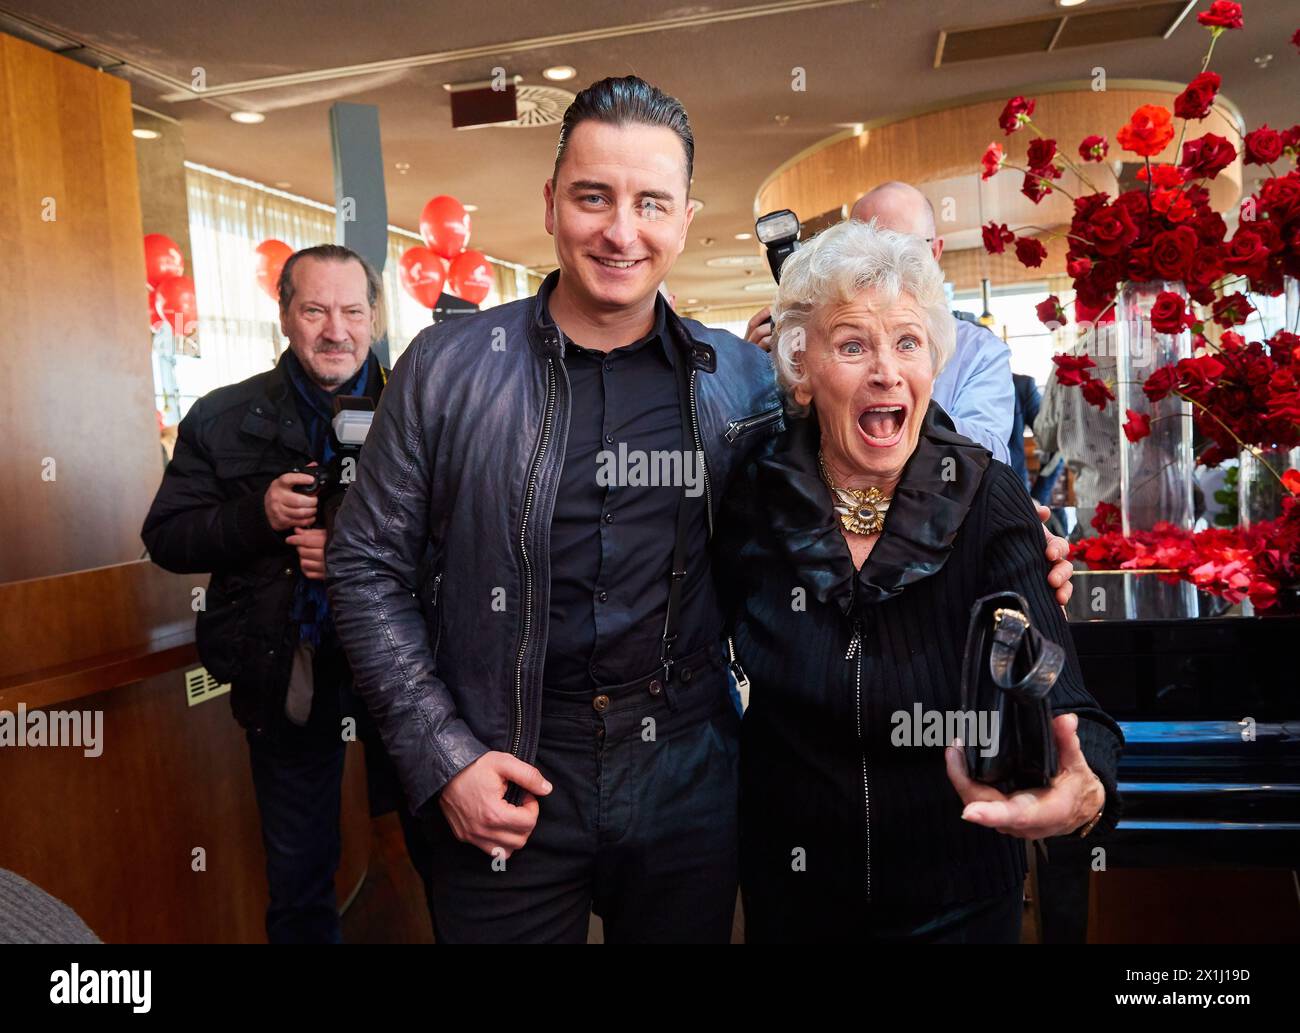 Silvia Schneider presents her Valentine's Collection at Sky Bar in Vienna, Austria, on 4 th February 2019. PICTURE:  Silvia Schneider presents her Valentine's Collection at Sky Bar in Vienna, Austria, on 4 th February 2019. PICTURE: Austrian folk singer Andreas GABALIER (L) and Waltraut HAAS - 20190204 PD1936 - Rechteinfo: Rights Managed (RM) Stock Photo